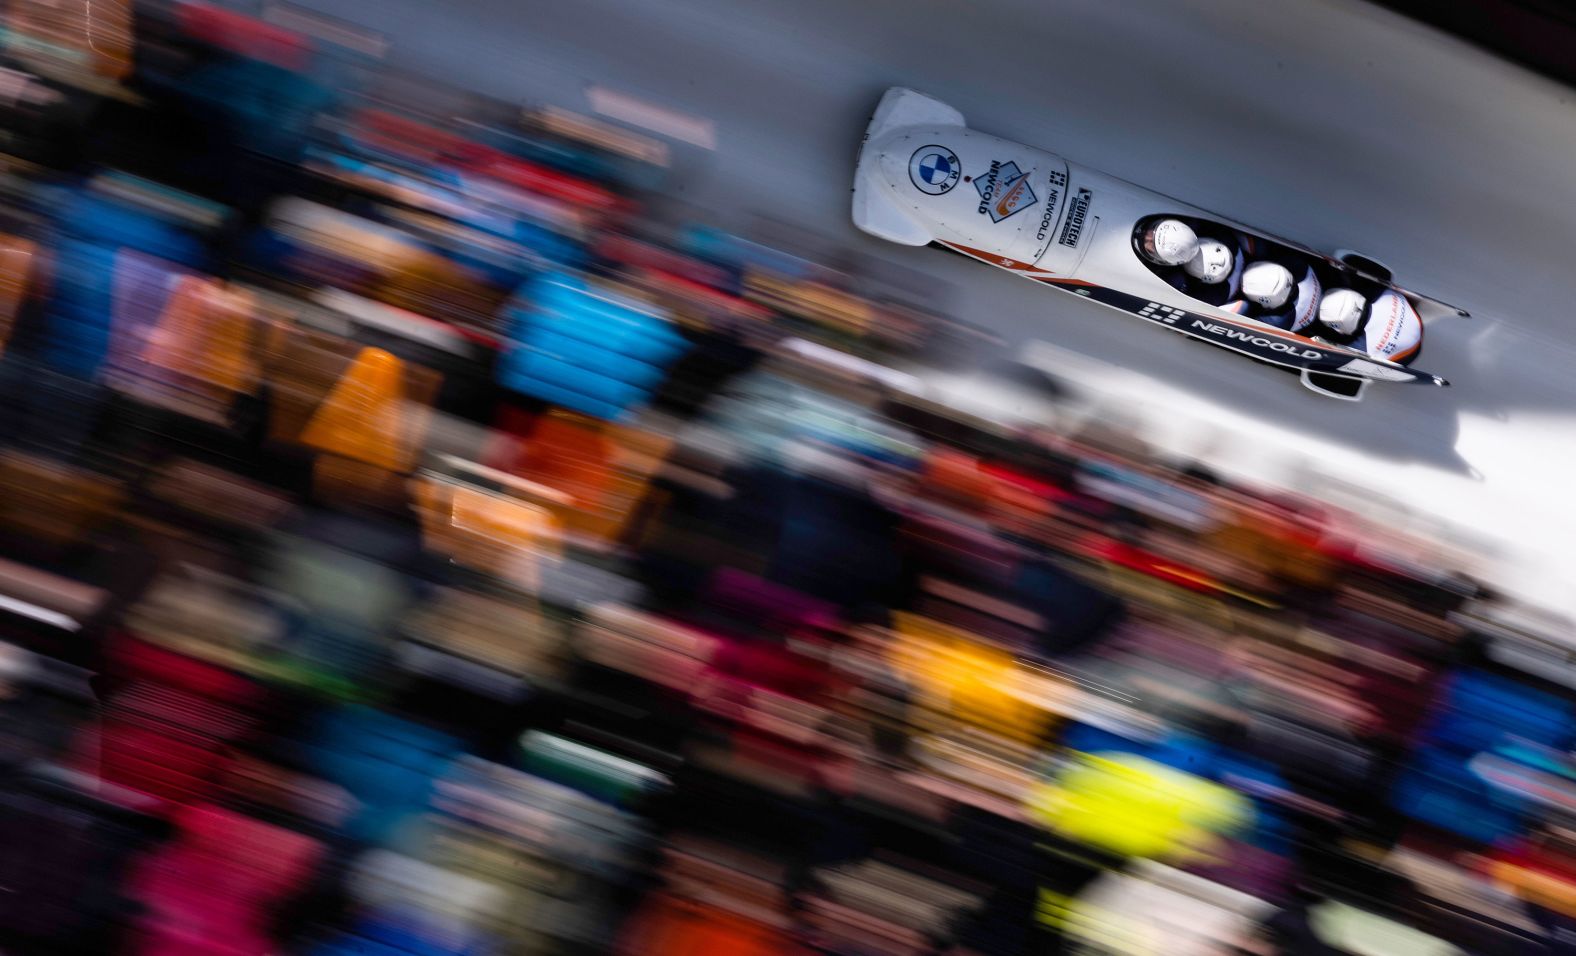 In this photo, taken with a slow shutter speed, Dutch bobsledders Dave Wesselink, Janko Franjic, Jelen Franjic and Stephan Huis compete in the IBSF World Championships on Saturday, March 2.